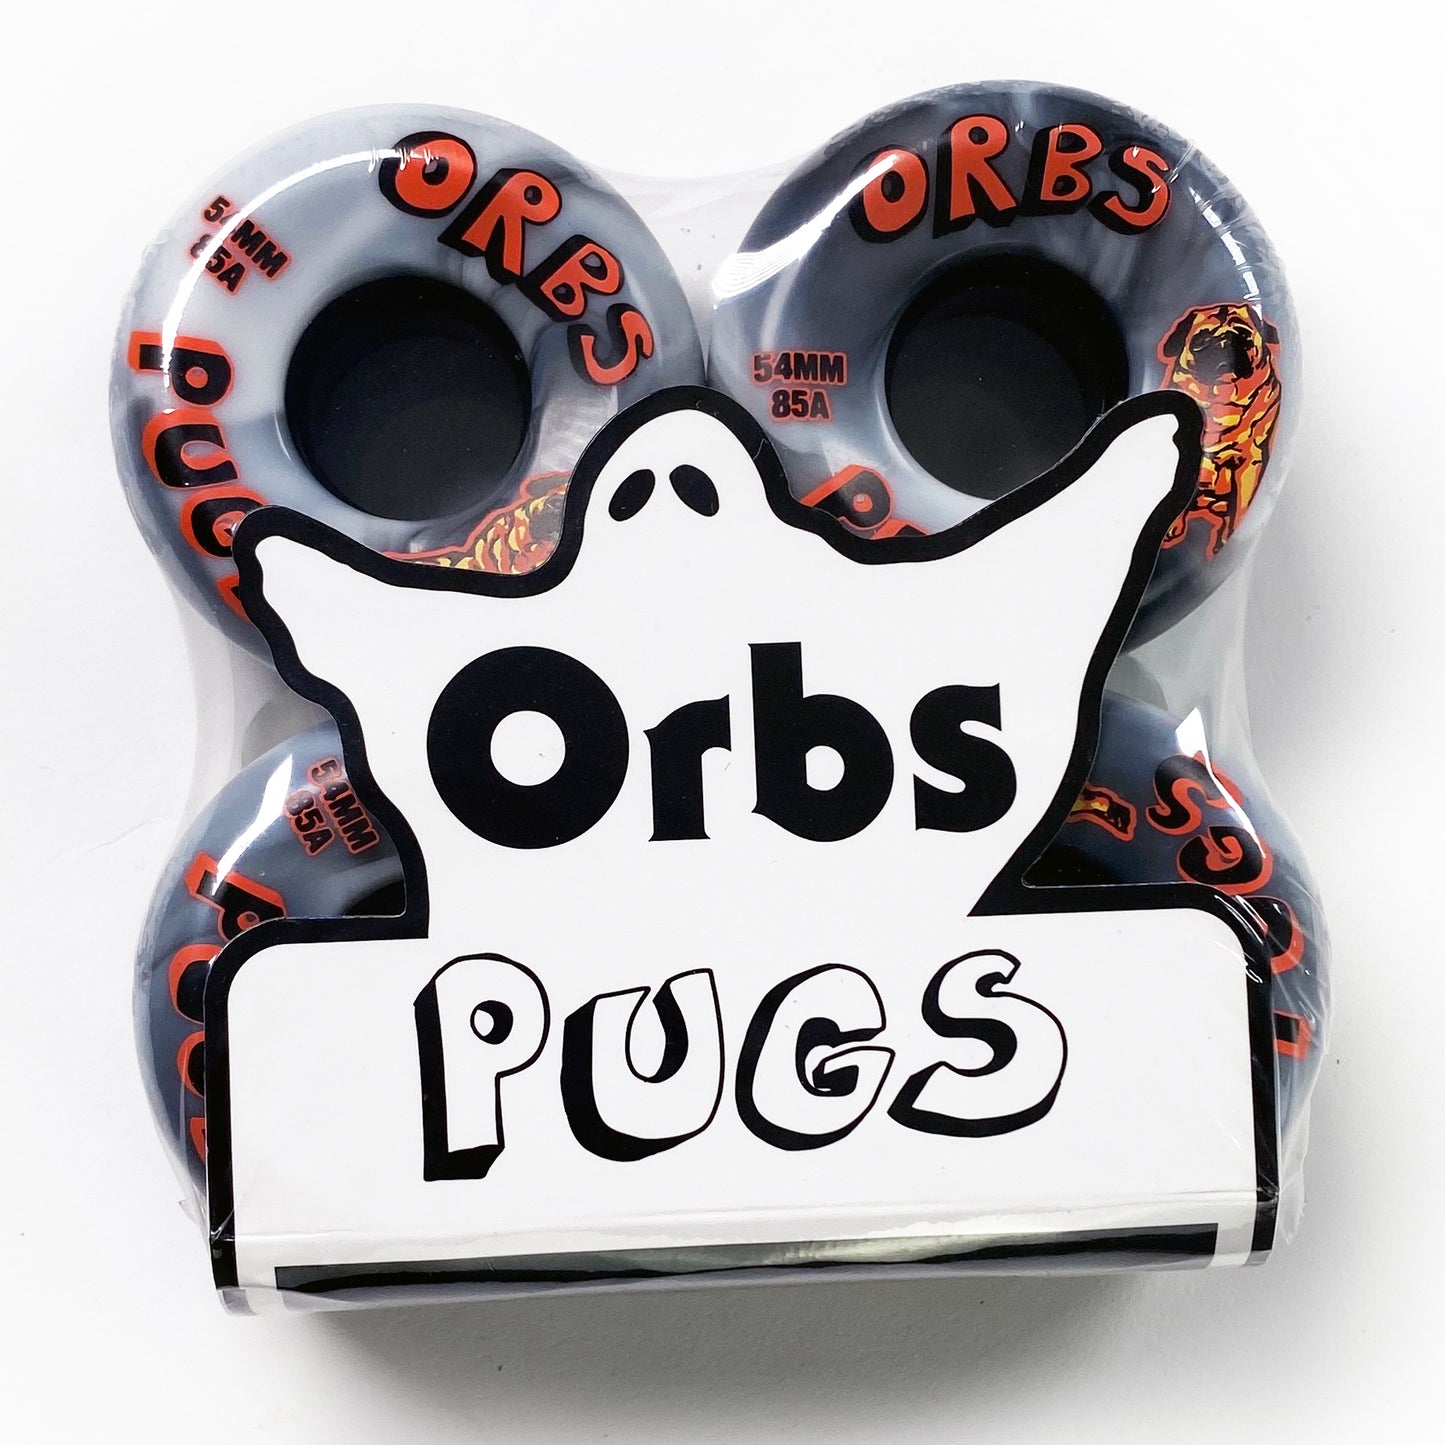 Orbs - 54mm - Pugs 85A Soft Wheels - Black / White - Prime Delux Store